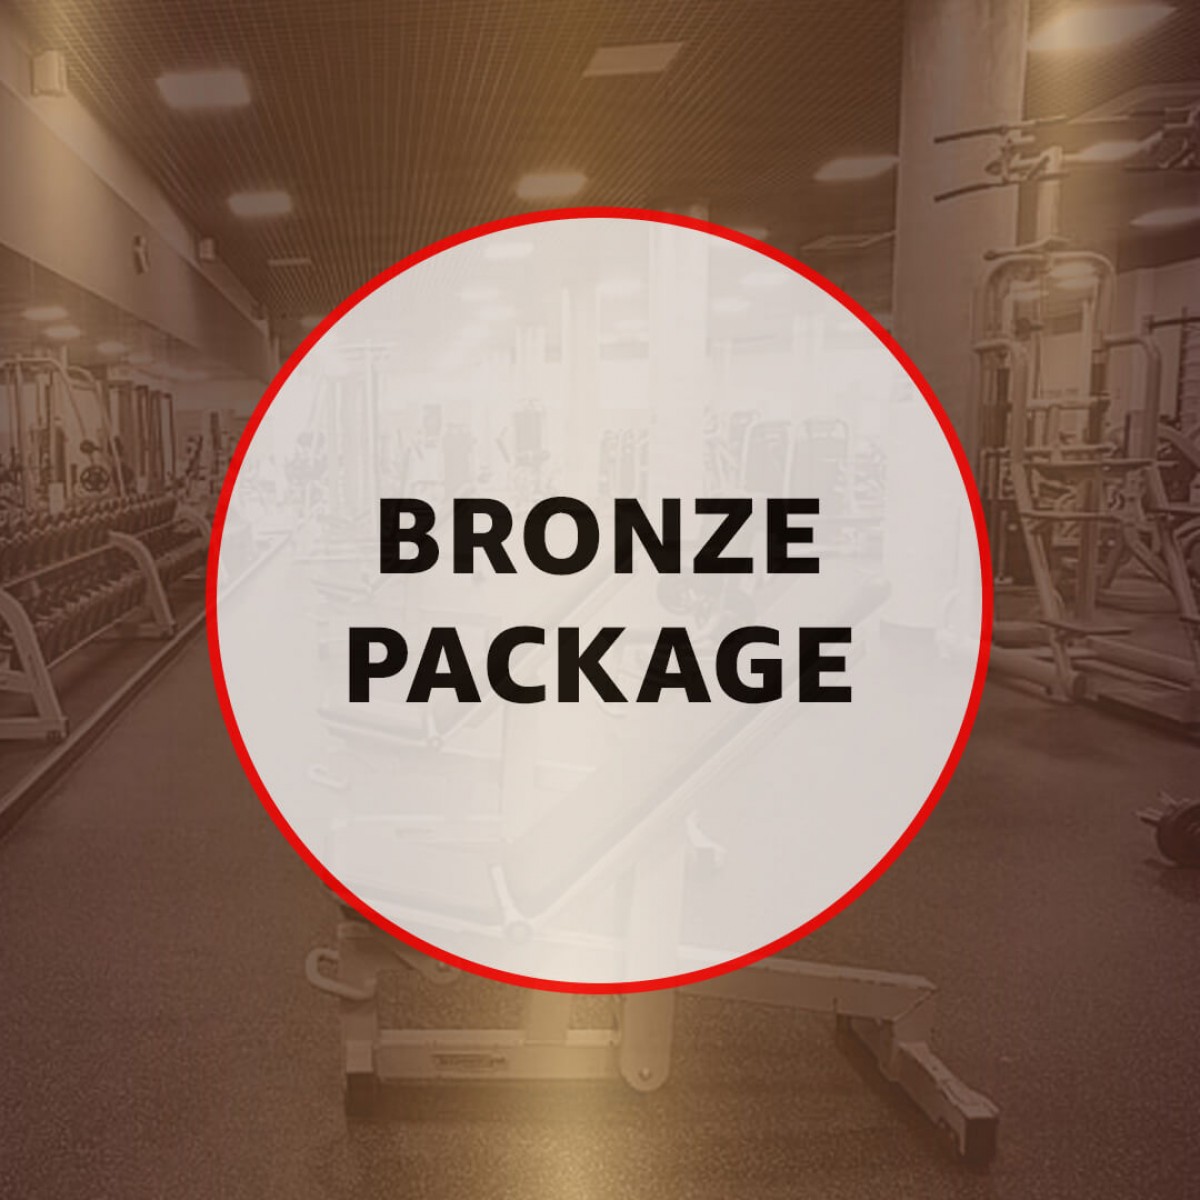 Corporate Office Gym - Bronze Package